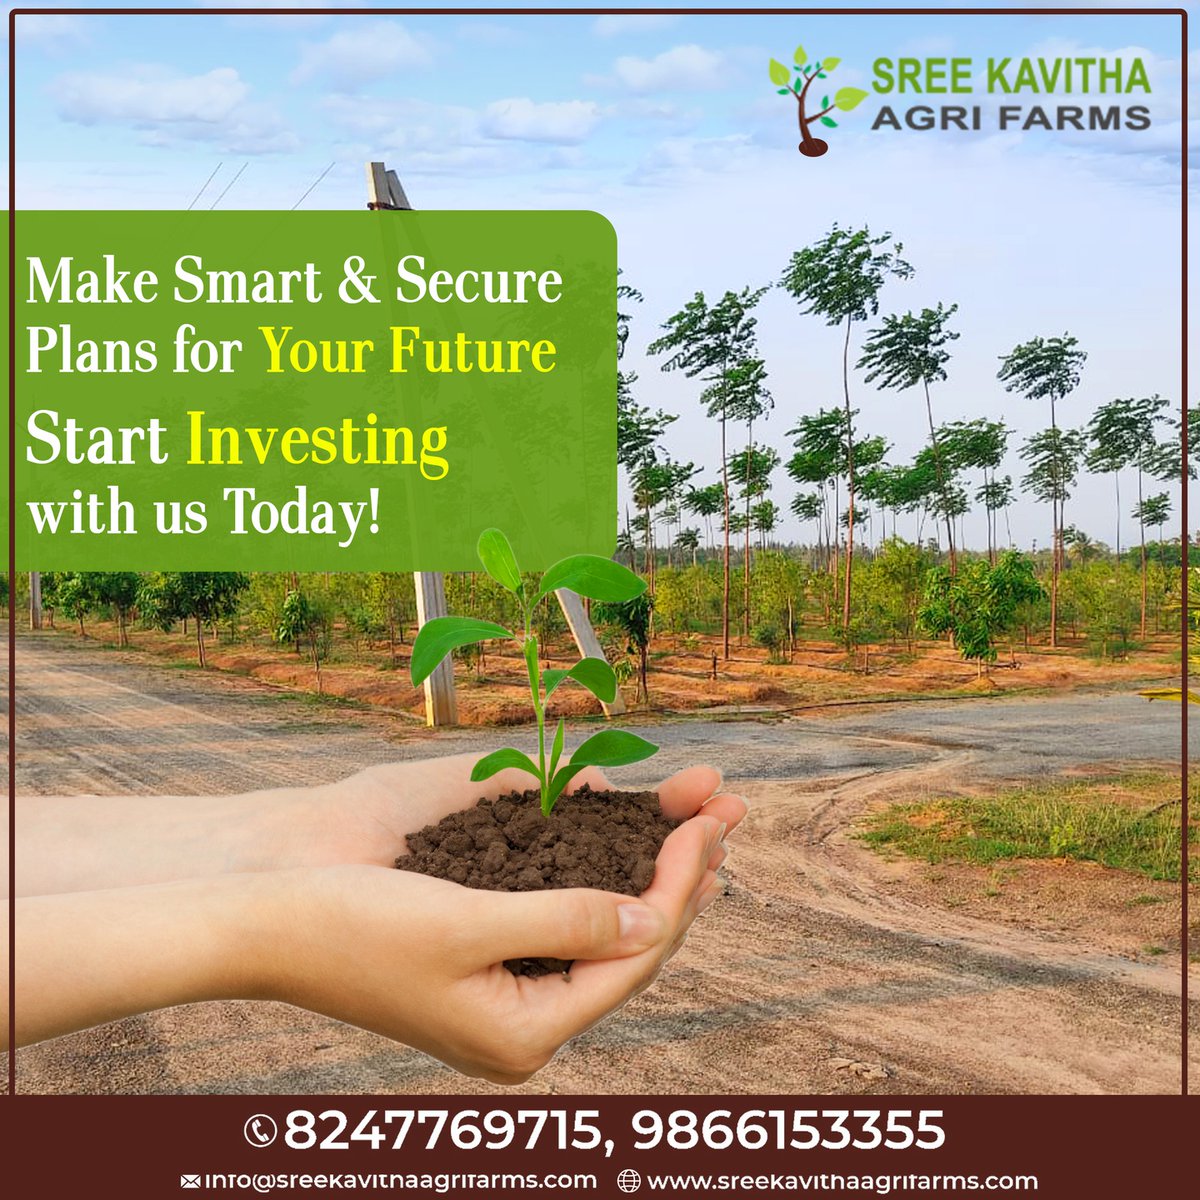 Chase your goals to fuel your effrts and invest in property

Visit us at sreekavithaagrifarms.com
Contact :91 9866124455
Email: info@sreekavithaagrifarms.com

#smartinvesting #Sreevanam #sandalwoodopenplots #sreekavithaagrifarms #onetimeinvestment #typuram #SkAgriFarms